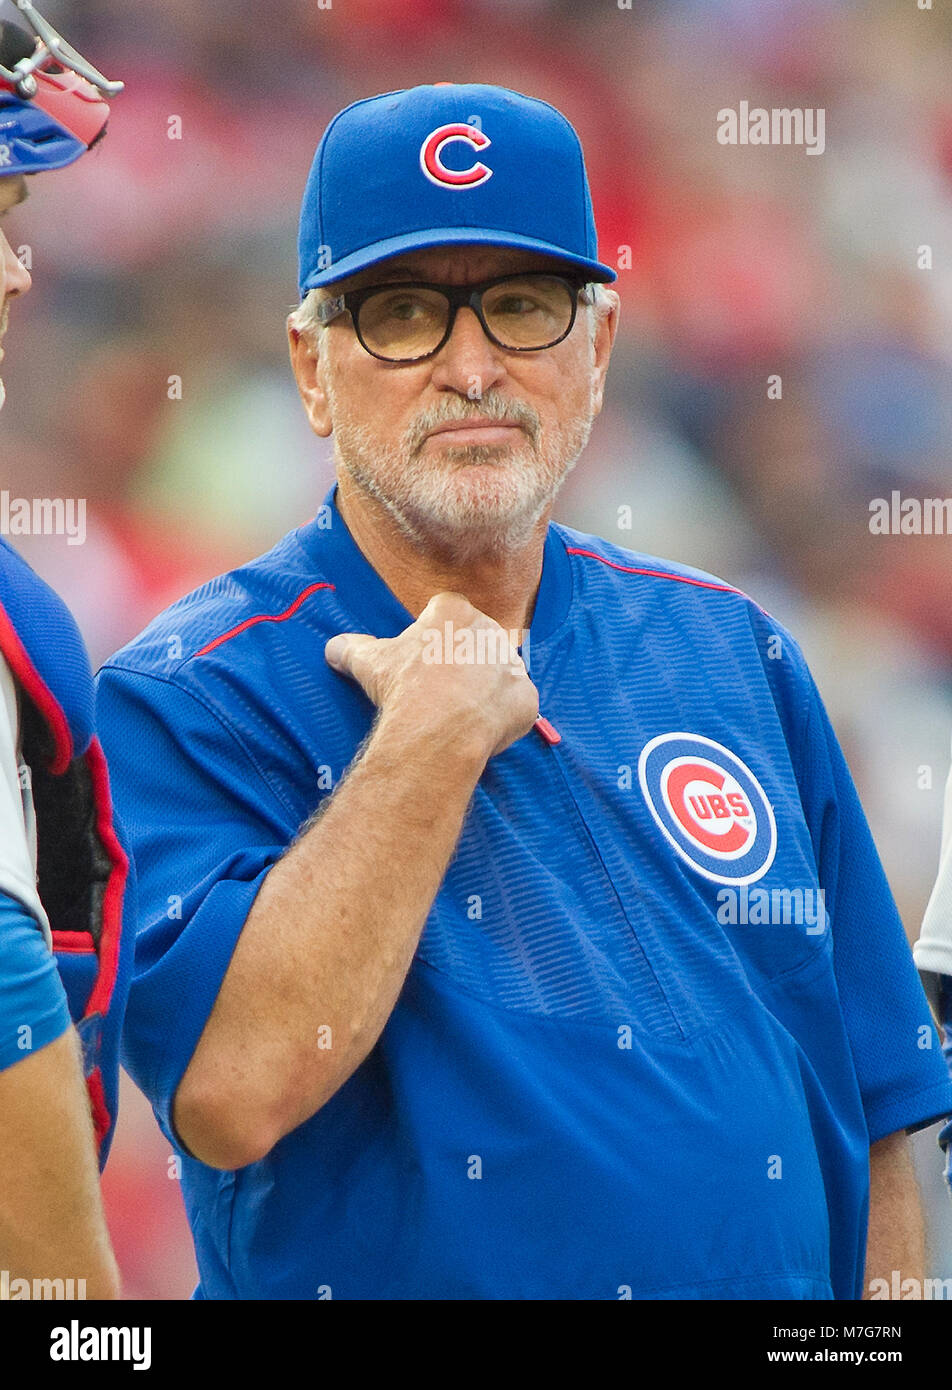 Chicago Cubs manager Joe Maddon (70) on the mound during one of his pitching changes in the tenth inning against the Washington Nationals at Nationals Park in Washington, D.C. on Wednesday, June 15, 2016.  The Nationals won the game 5 - 4 in 12 innings. Credit: Ron Sachs / CNP/MediaPunch ***FOR EDITORIAL USE ONLY*** Stock Photo